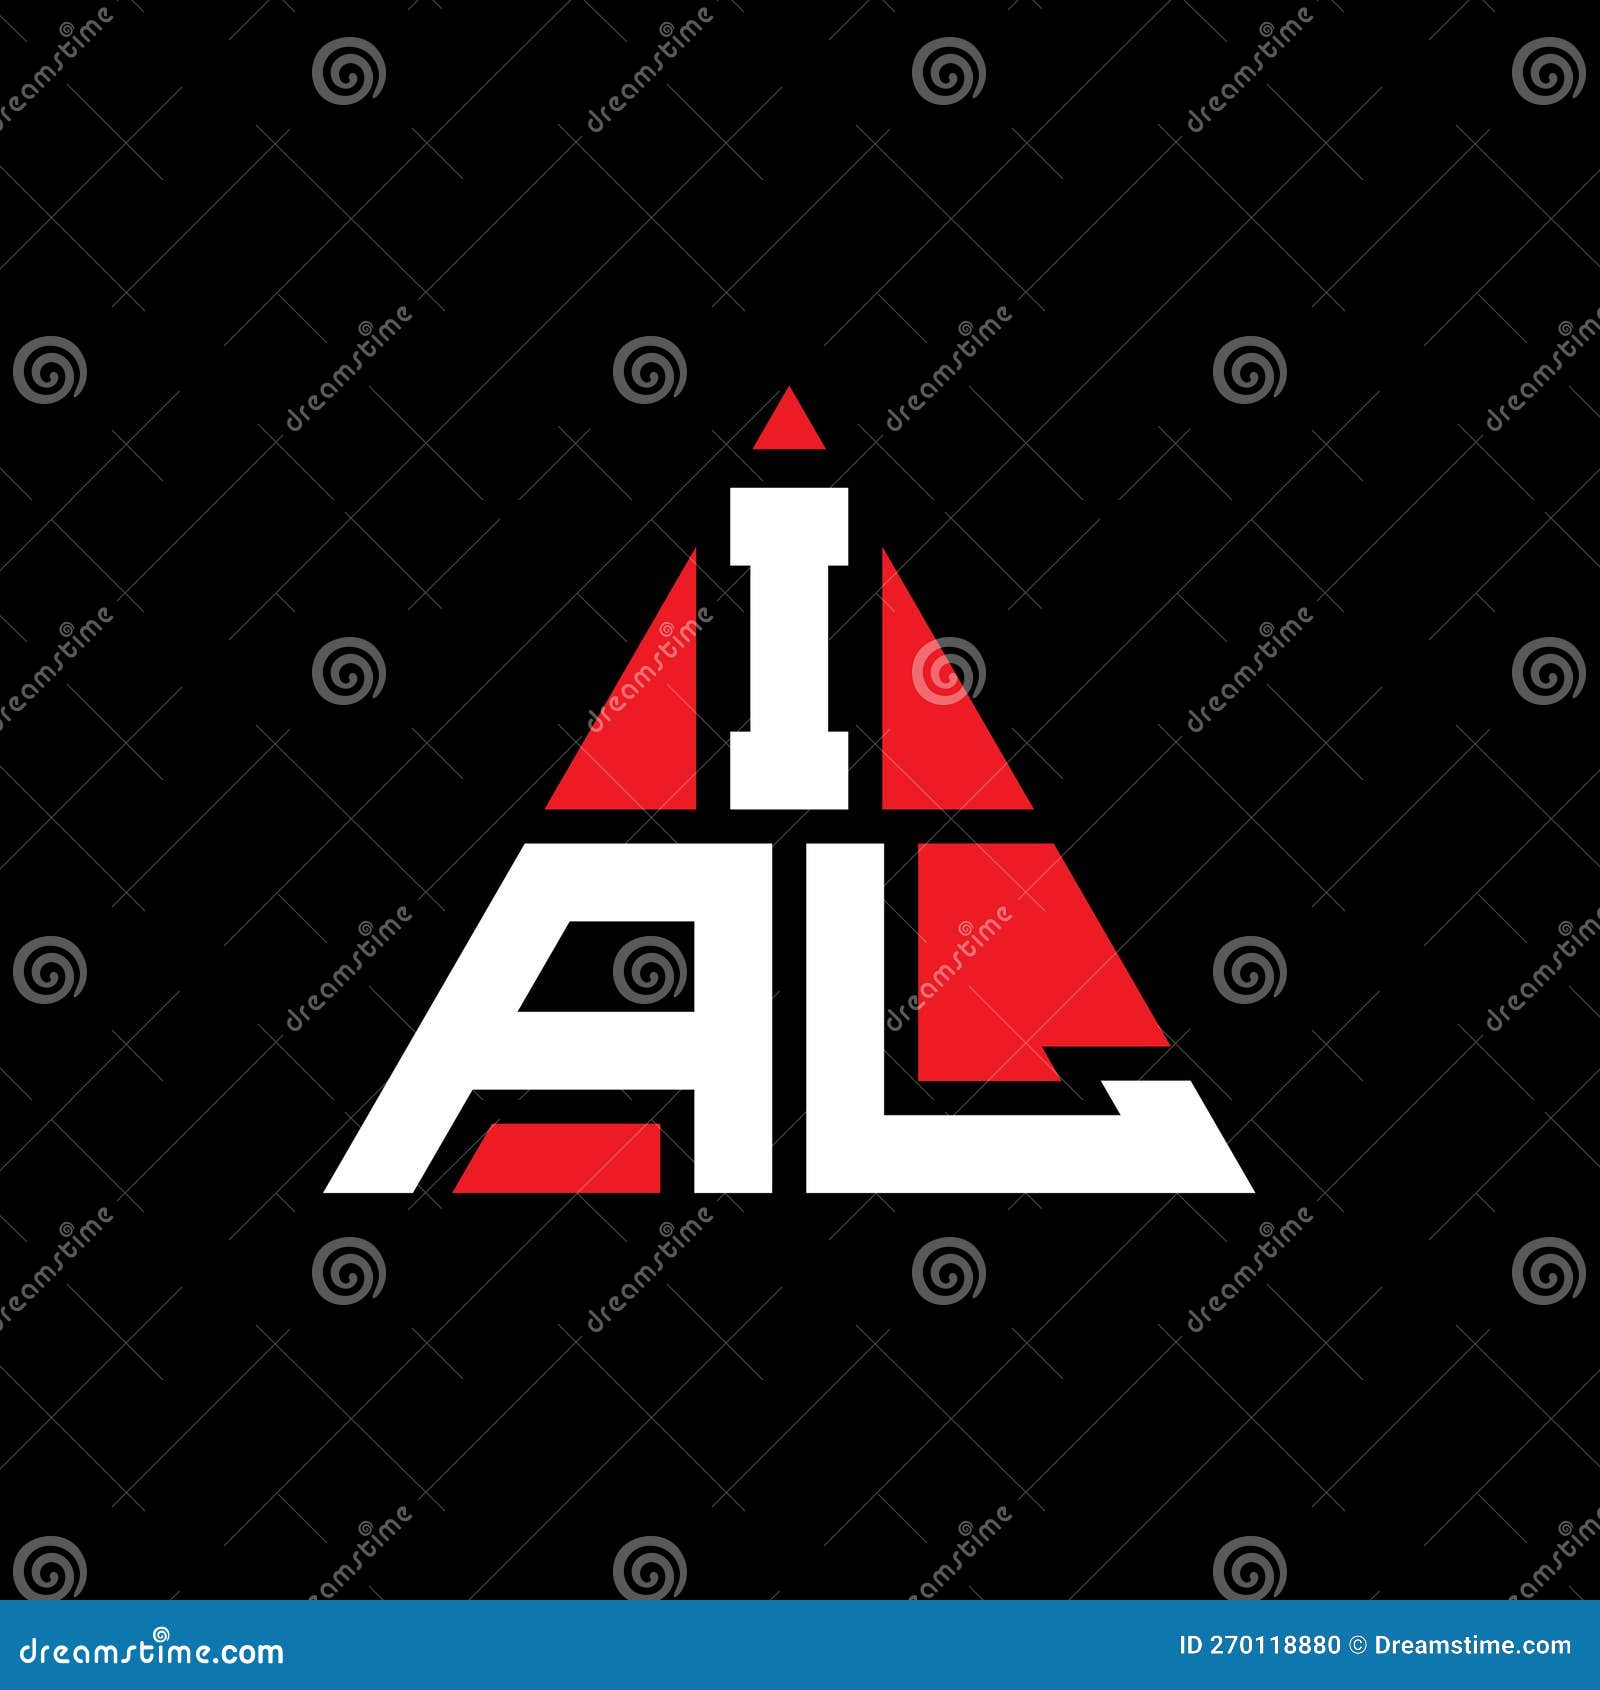 ial triangle letter logo  with triangle . ial triangle logo  monogram. ial triangle  logo template with red